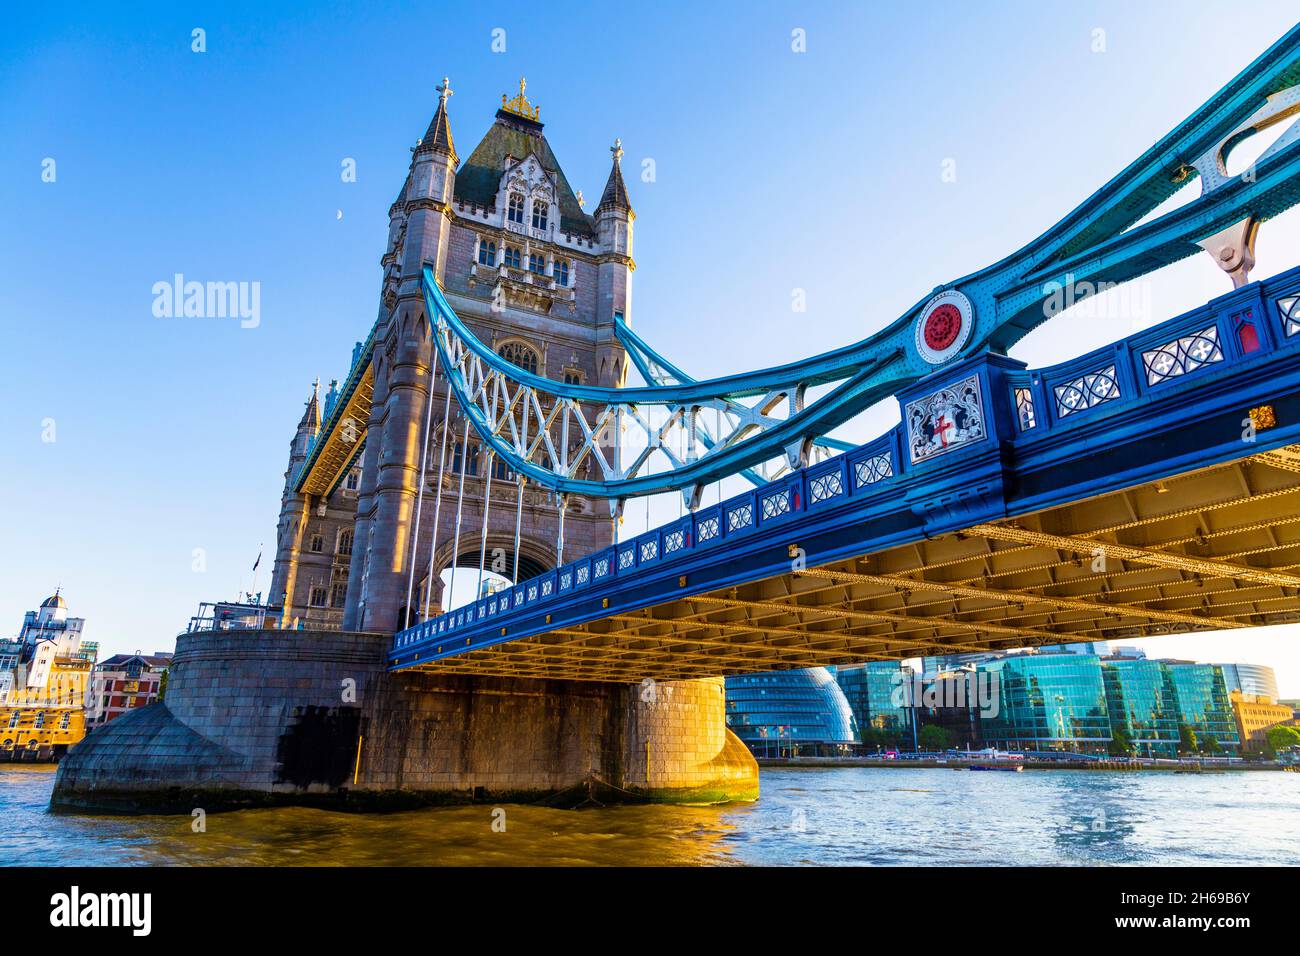 Tower Bridge over the Thames River at evening time, London, UK Stock Photo